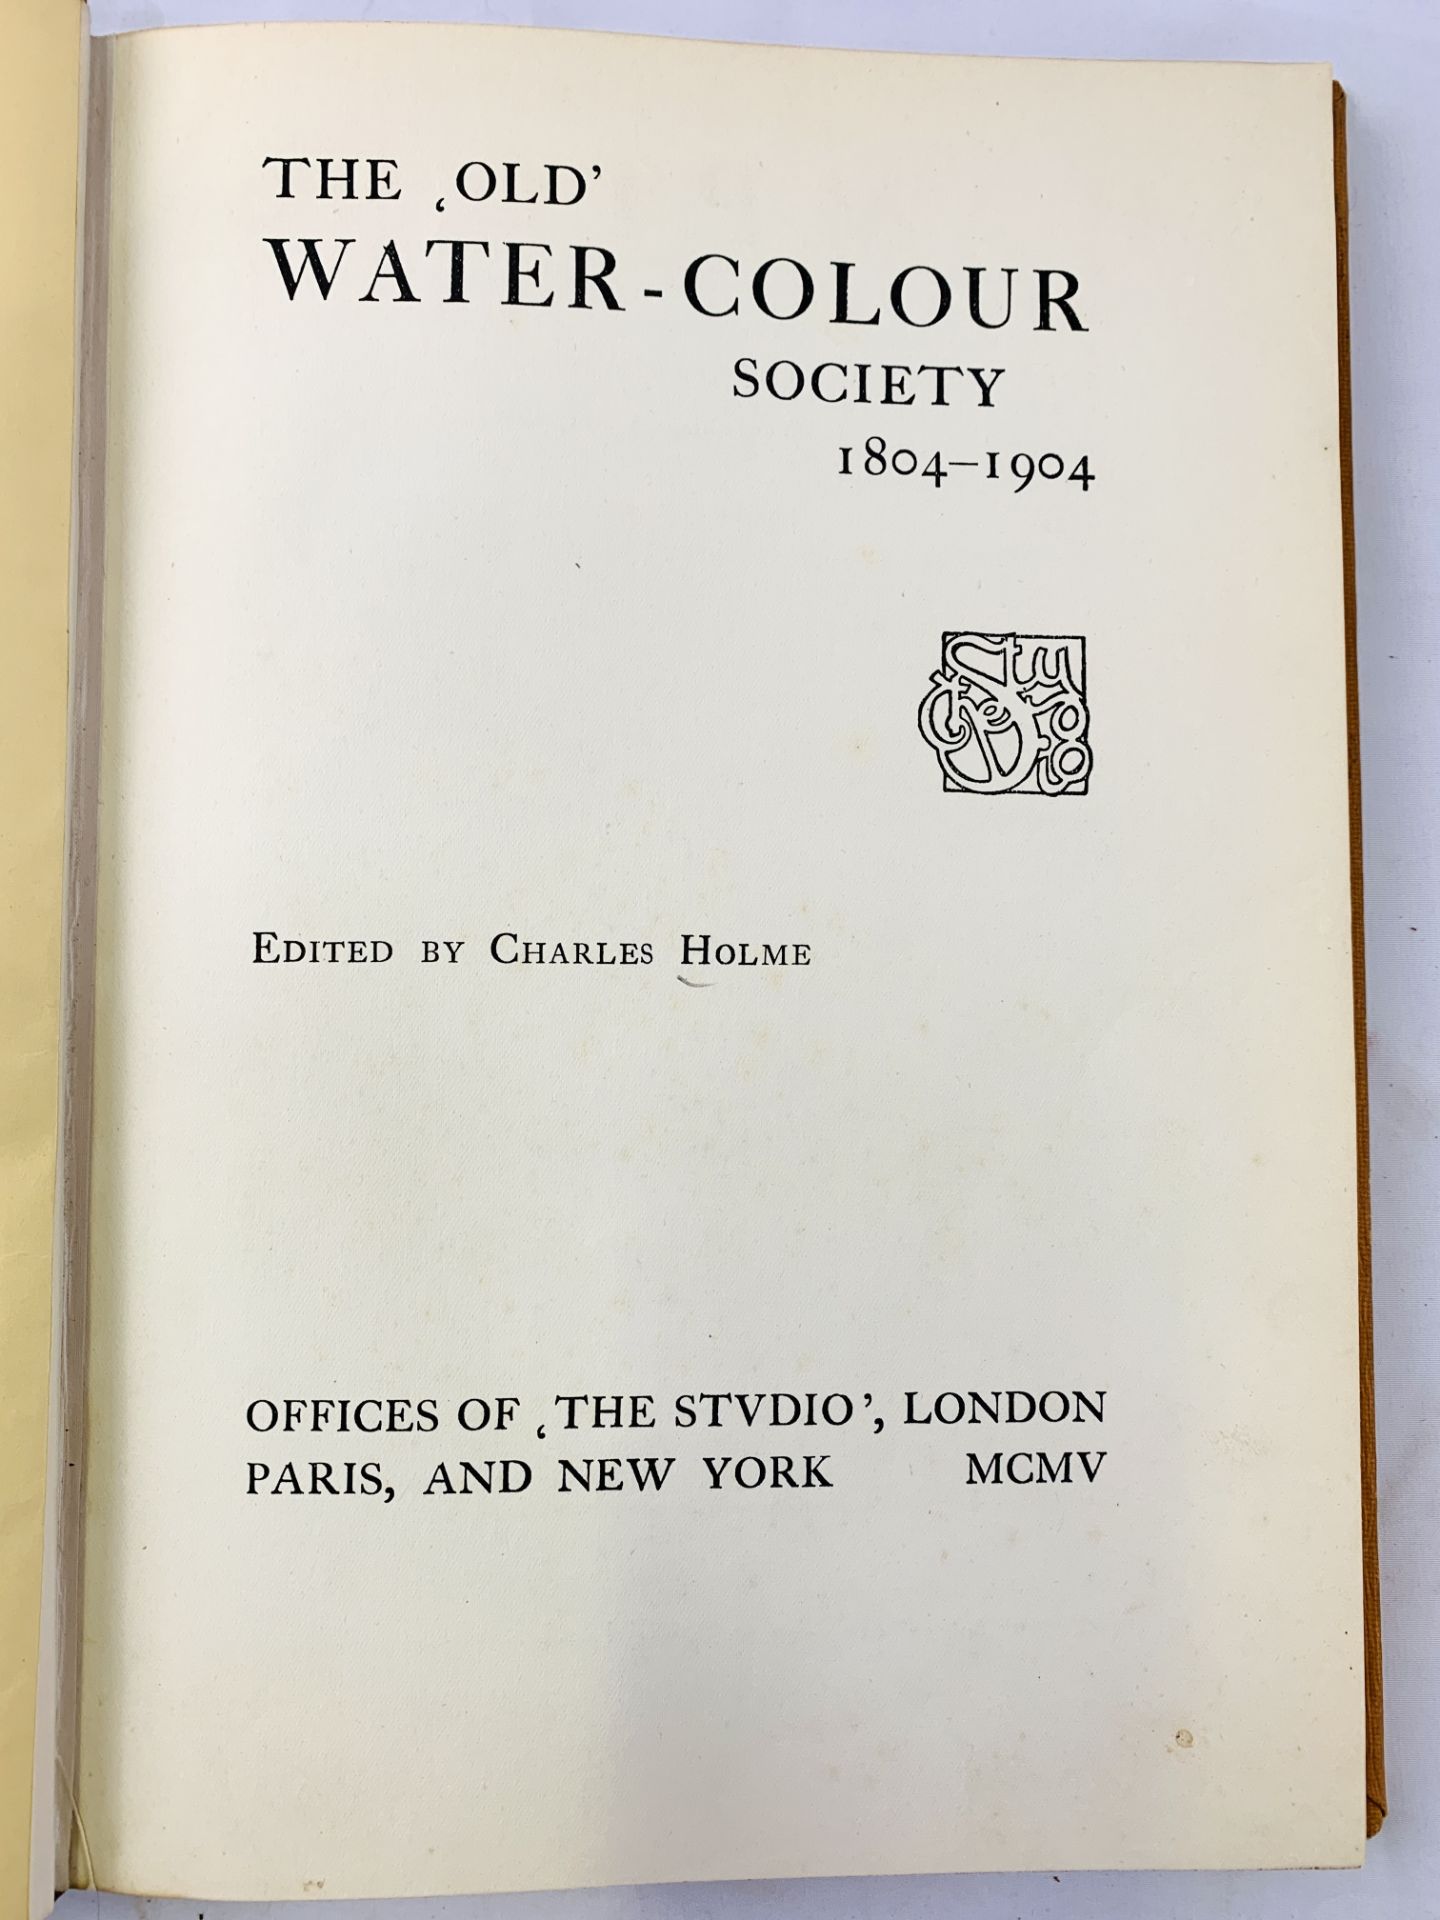 The Old Watercolour Society, 1804-1904, and Arts and Crafts, both edited by Charles Holme